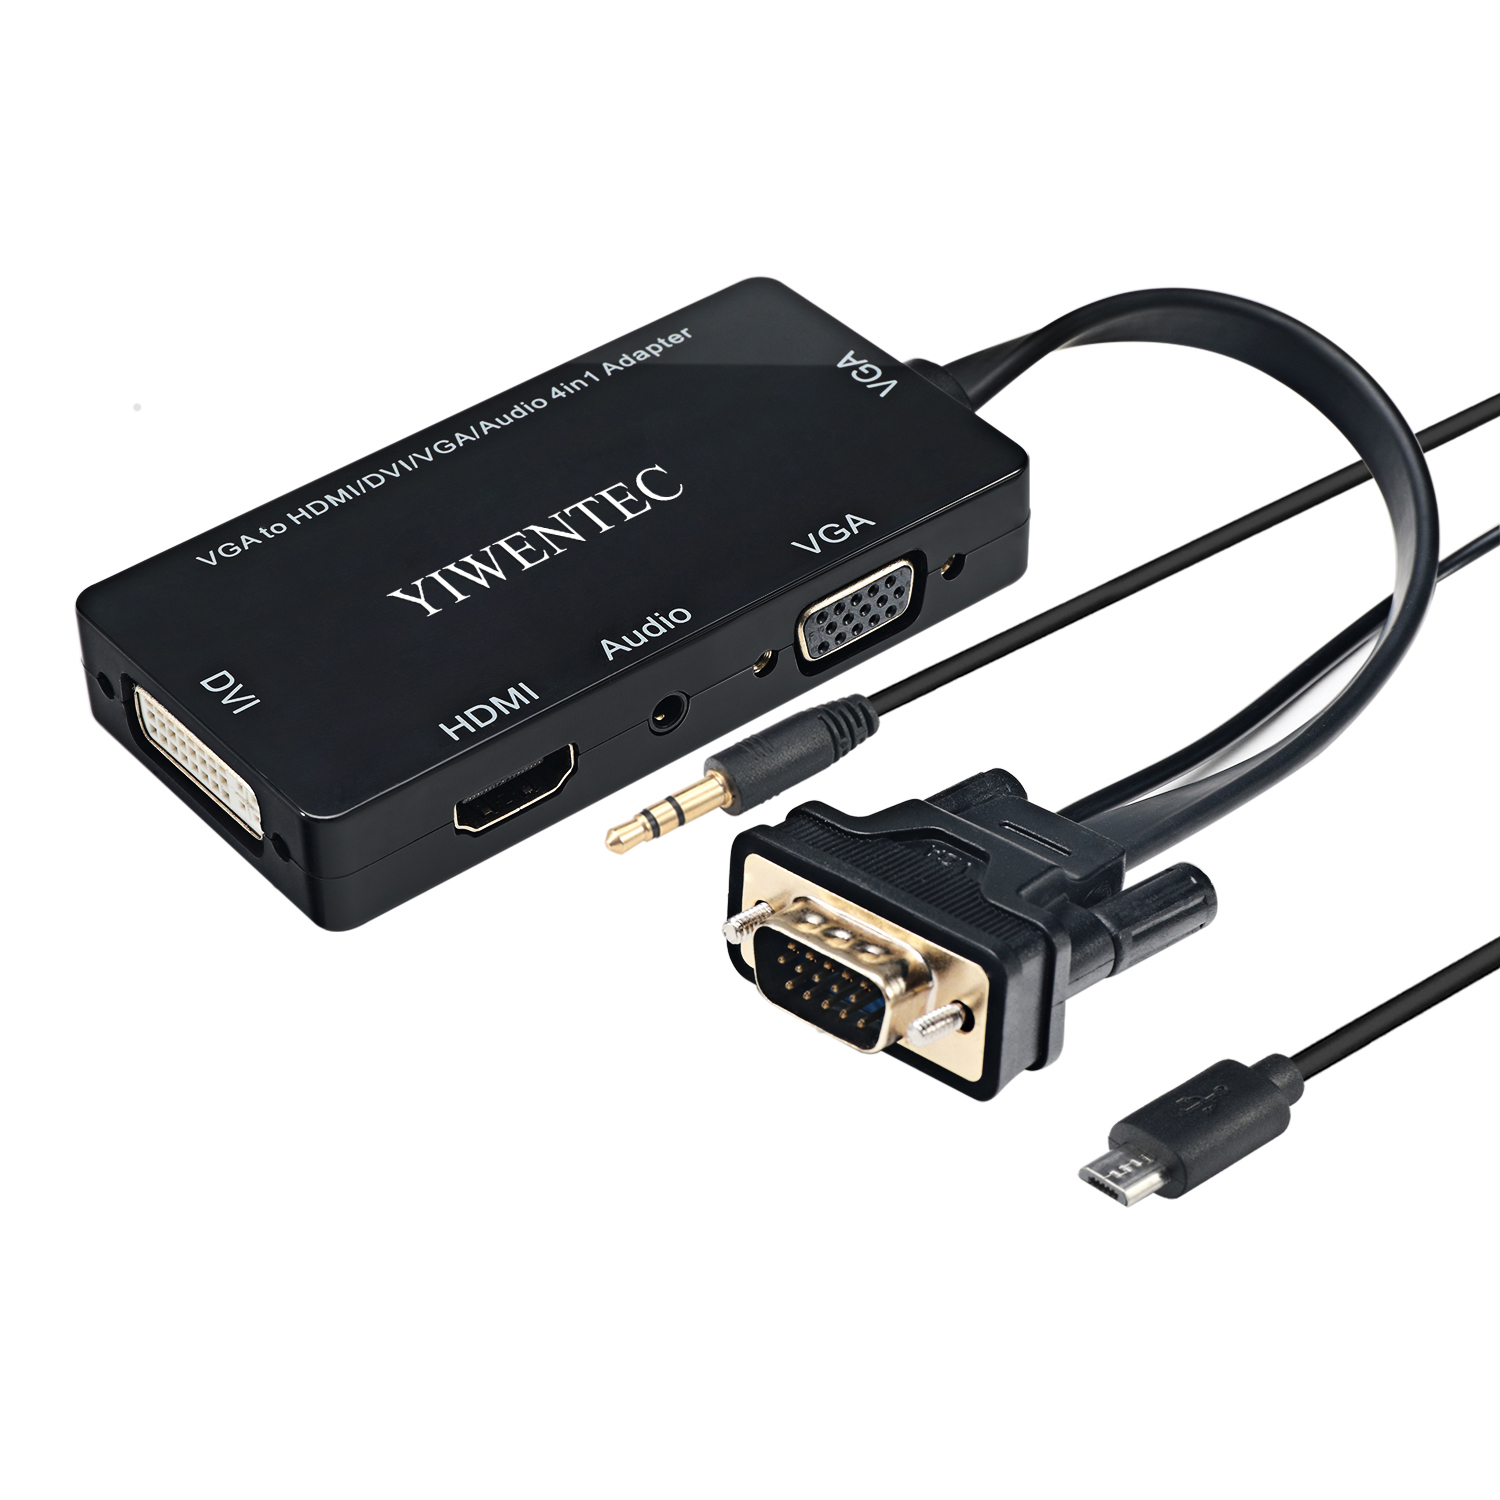 YIWENTEC VGA Male to VGA HDMI DVI Female 3IN1 Adapter Converter for Desktop Laptop VGA Graphics Card with Micro USB Power and Audio 3.5mm Jack Connect simultaneously E0409-HDMI To VGA